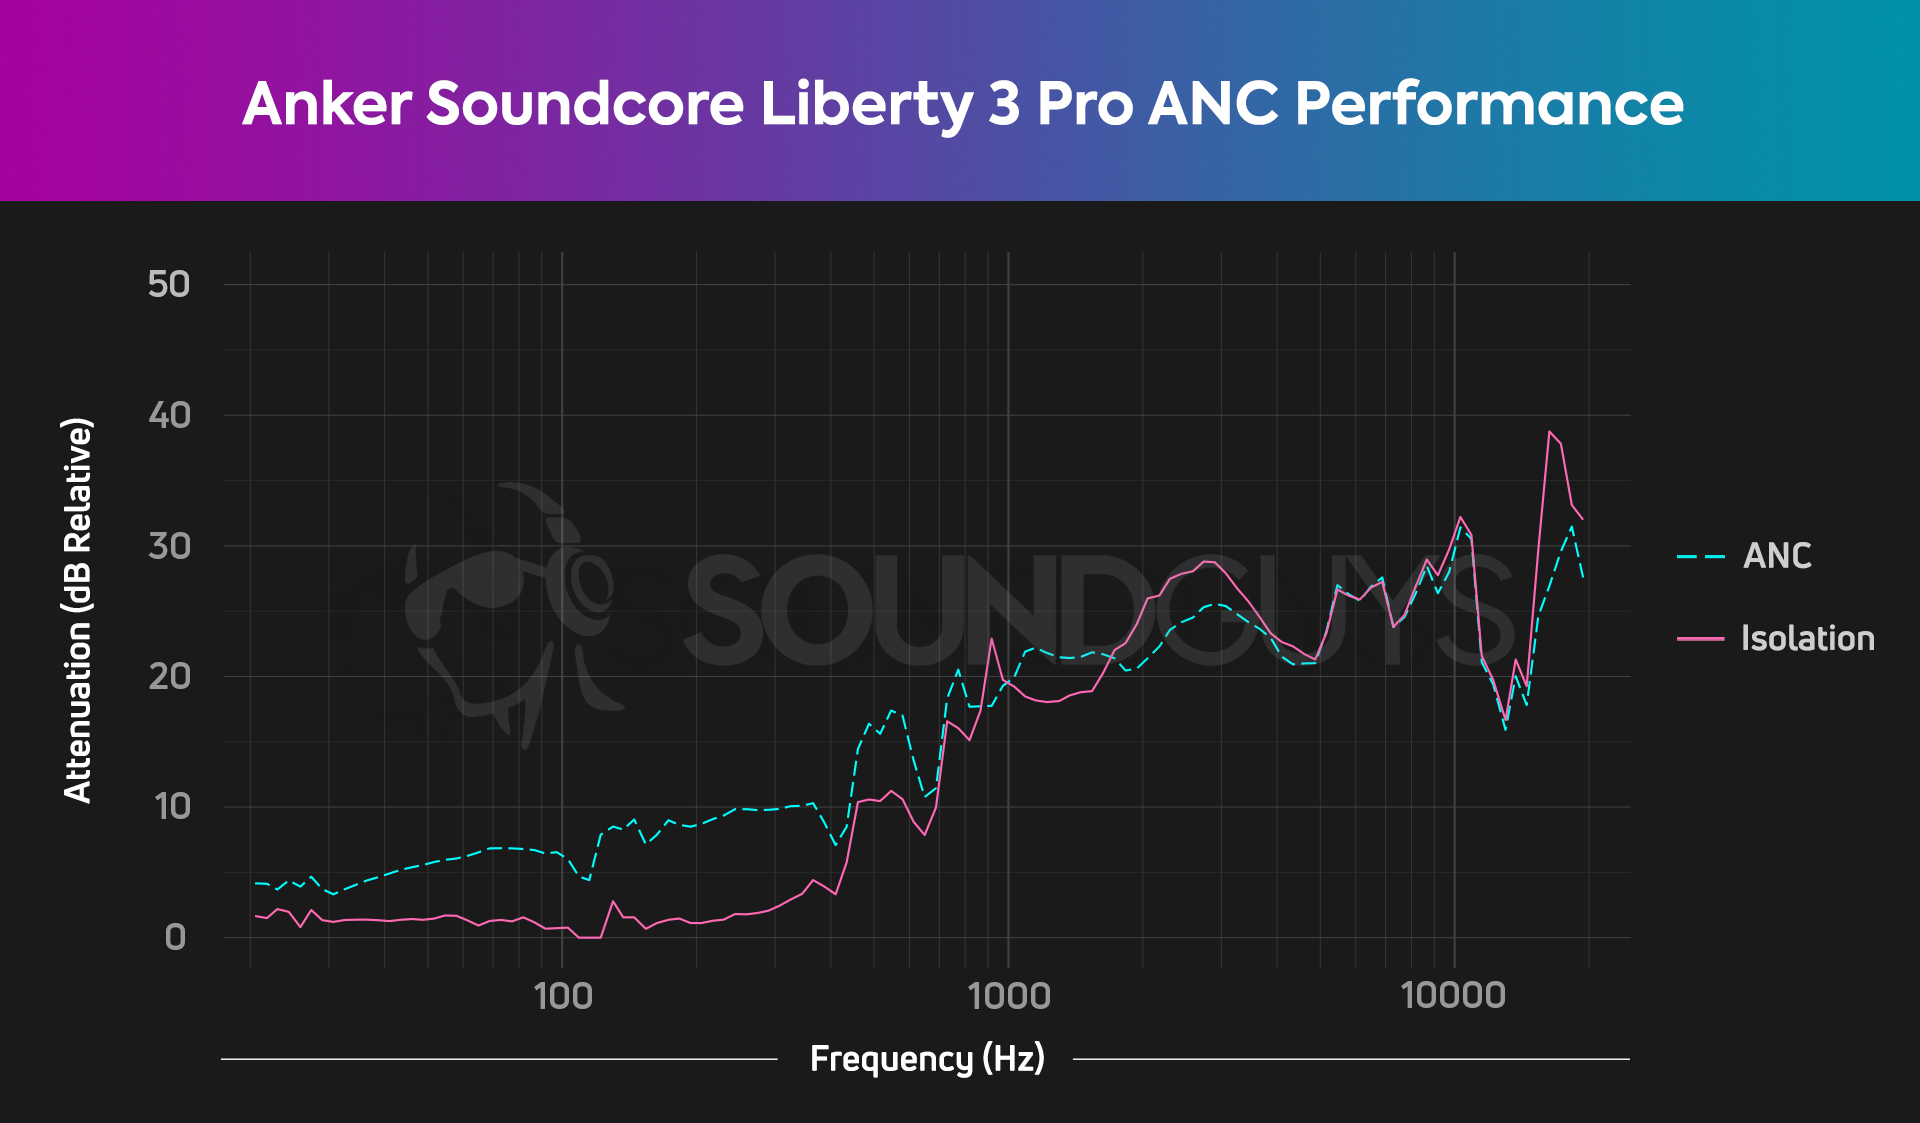 A chart showing the isolation and ANC attenuation performance of the Anker Soundcore Liberty 3 Pro, with minimal attenuation in the frequencies below 1kHz.